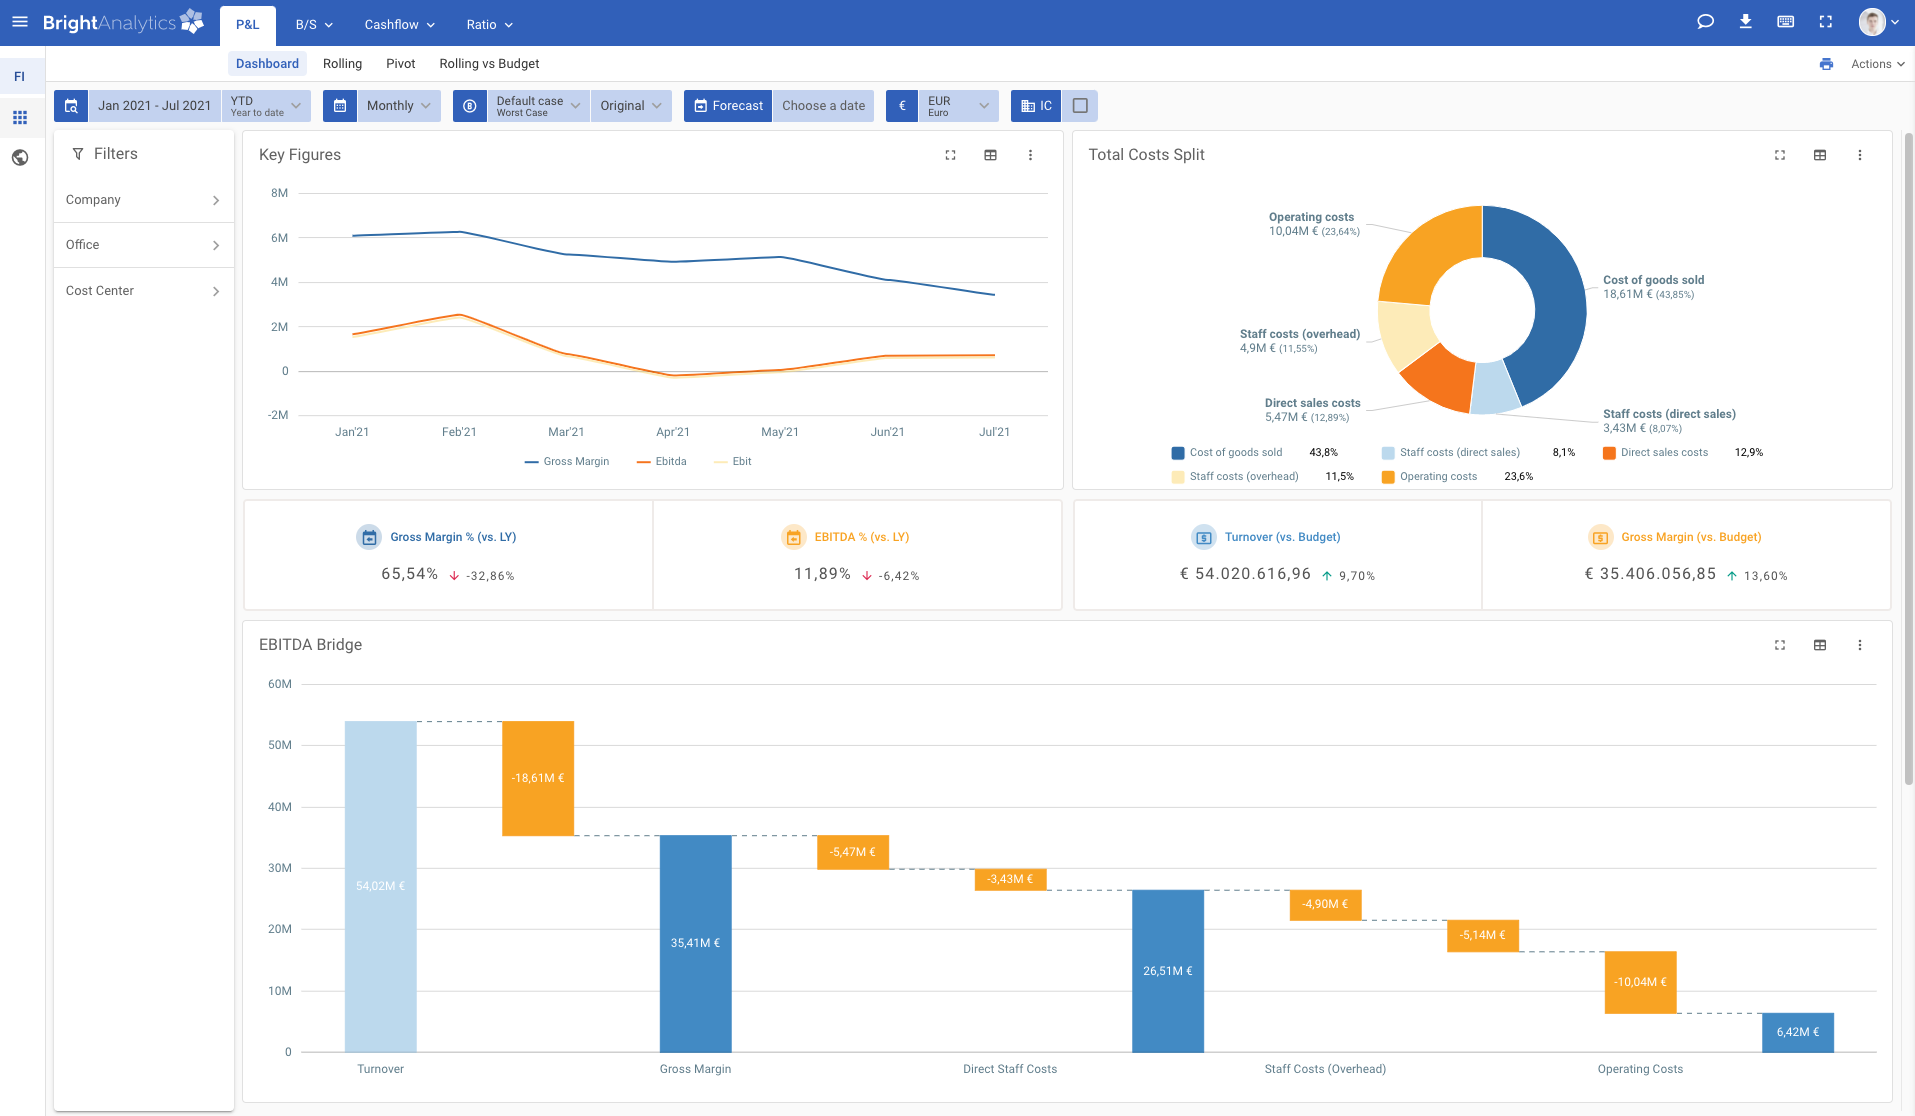 Aaro alternative - The intuitive and user-friendly interface of BrightAnalytics